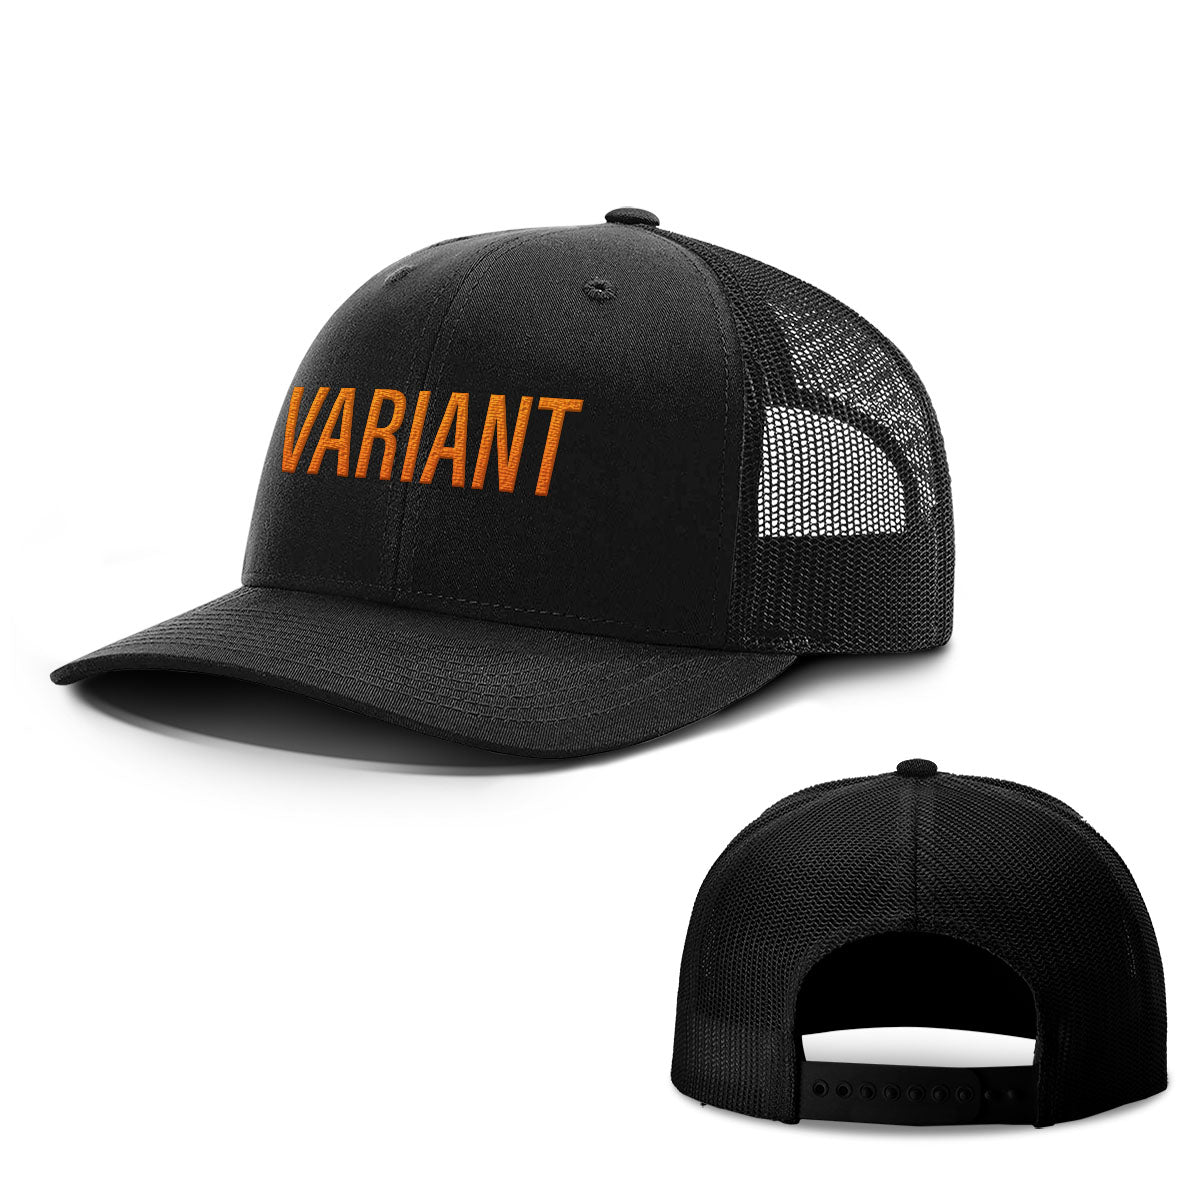 Variant Hats - BustedTees.com